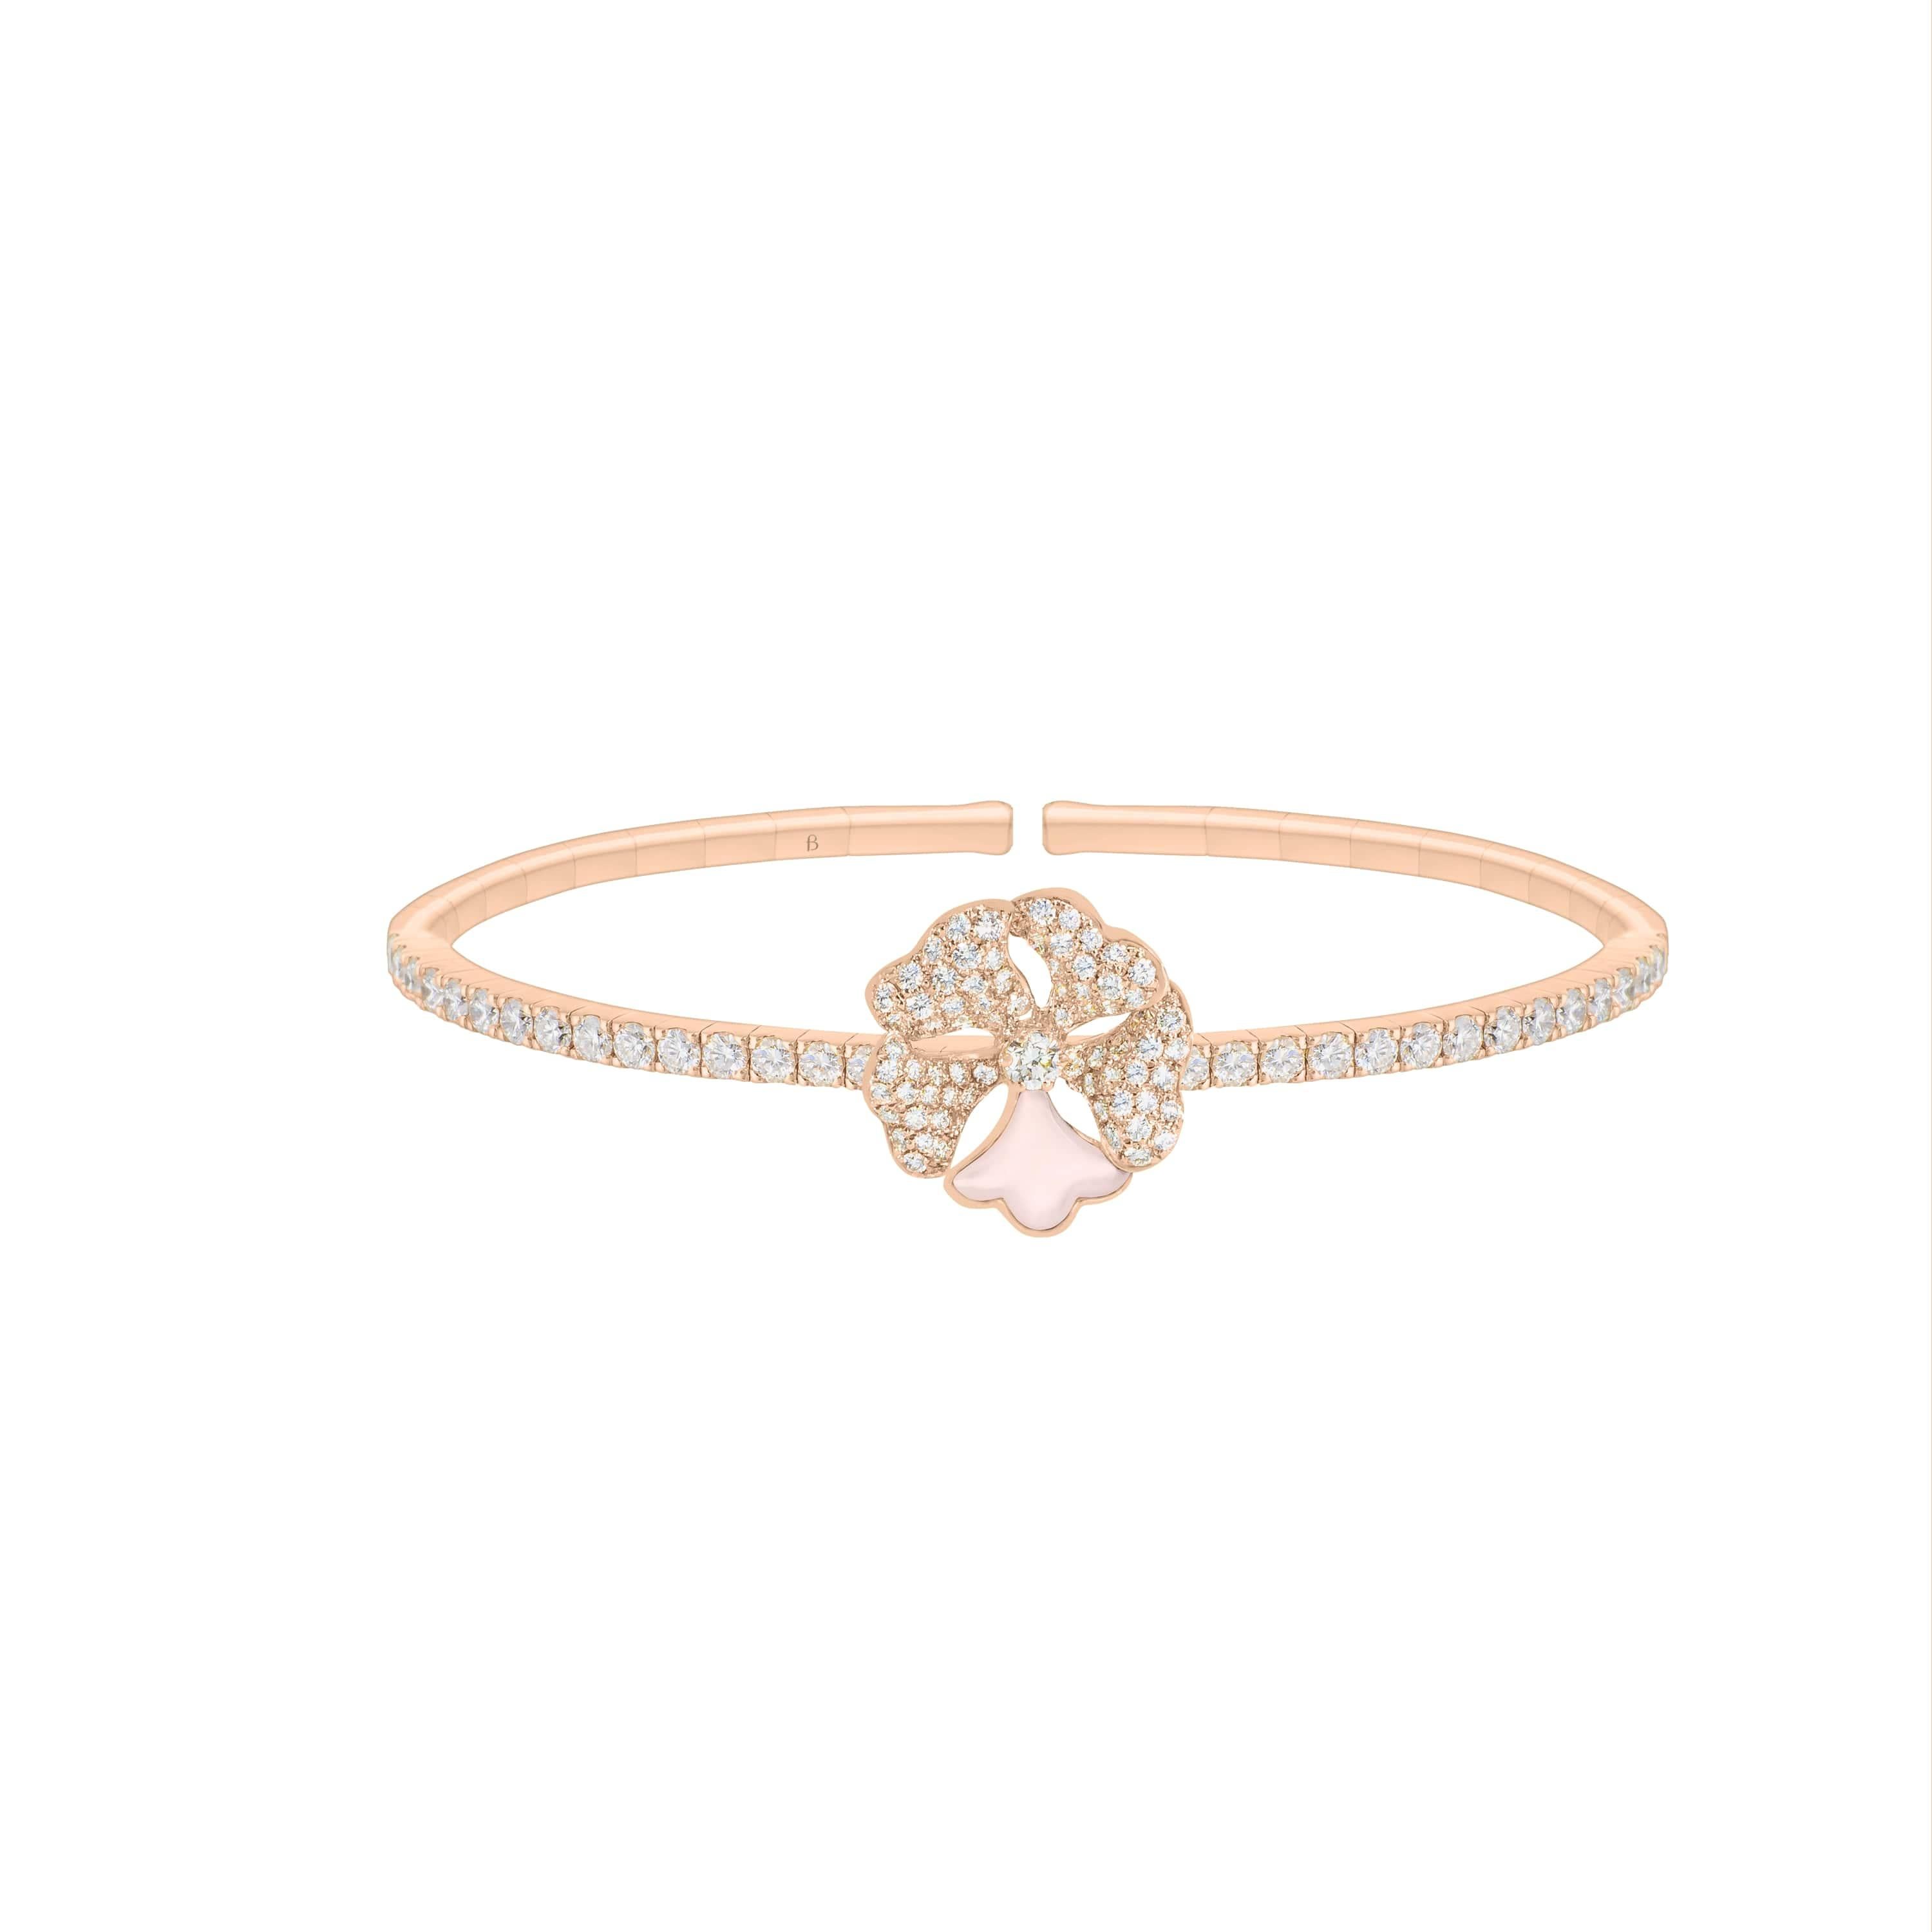 Bloom Diamond and Pink Mother-of-Pearl Solo Flower Bangle in 18K Rose Gold

Inspired by the exquisite petals of the alpine cinquefoil flower, the Bloom collection combines the richness of diamonds and precious metals with the light versatility of